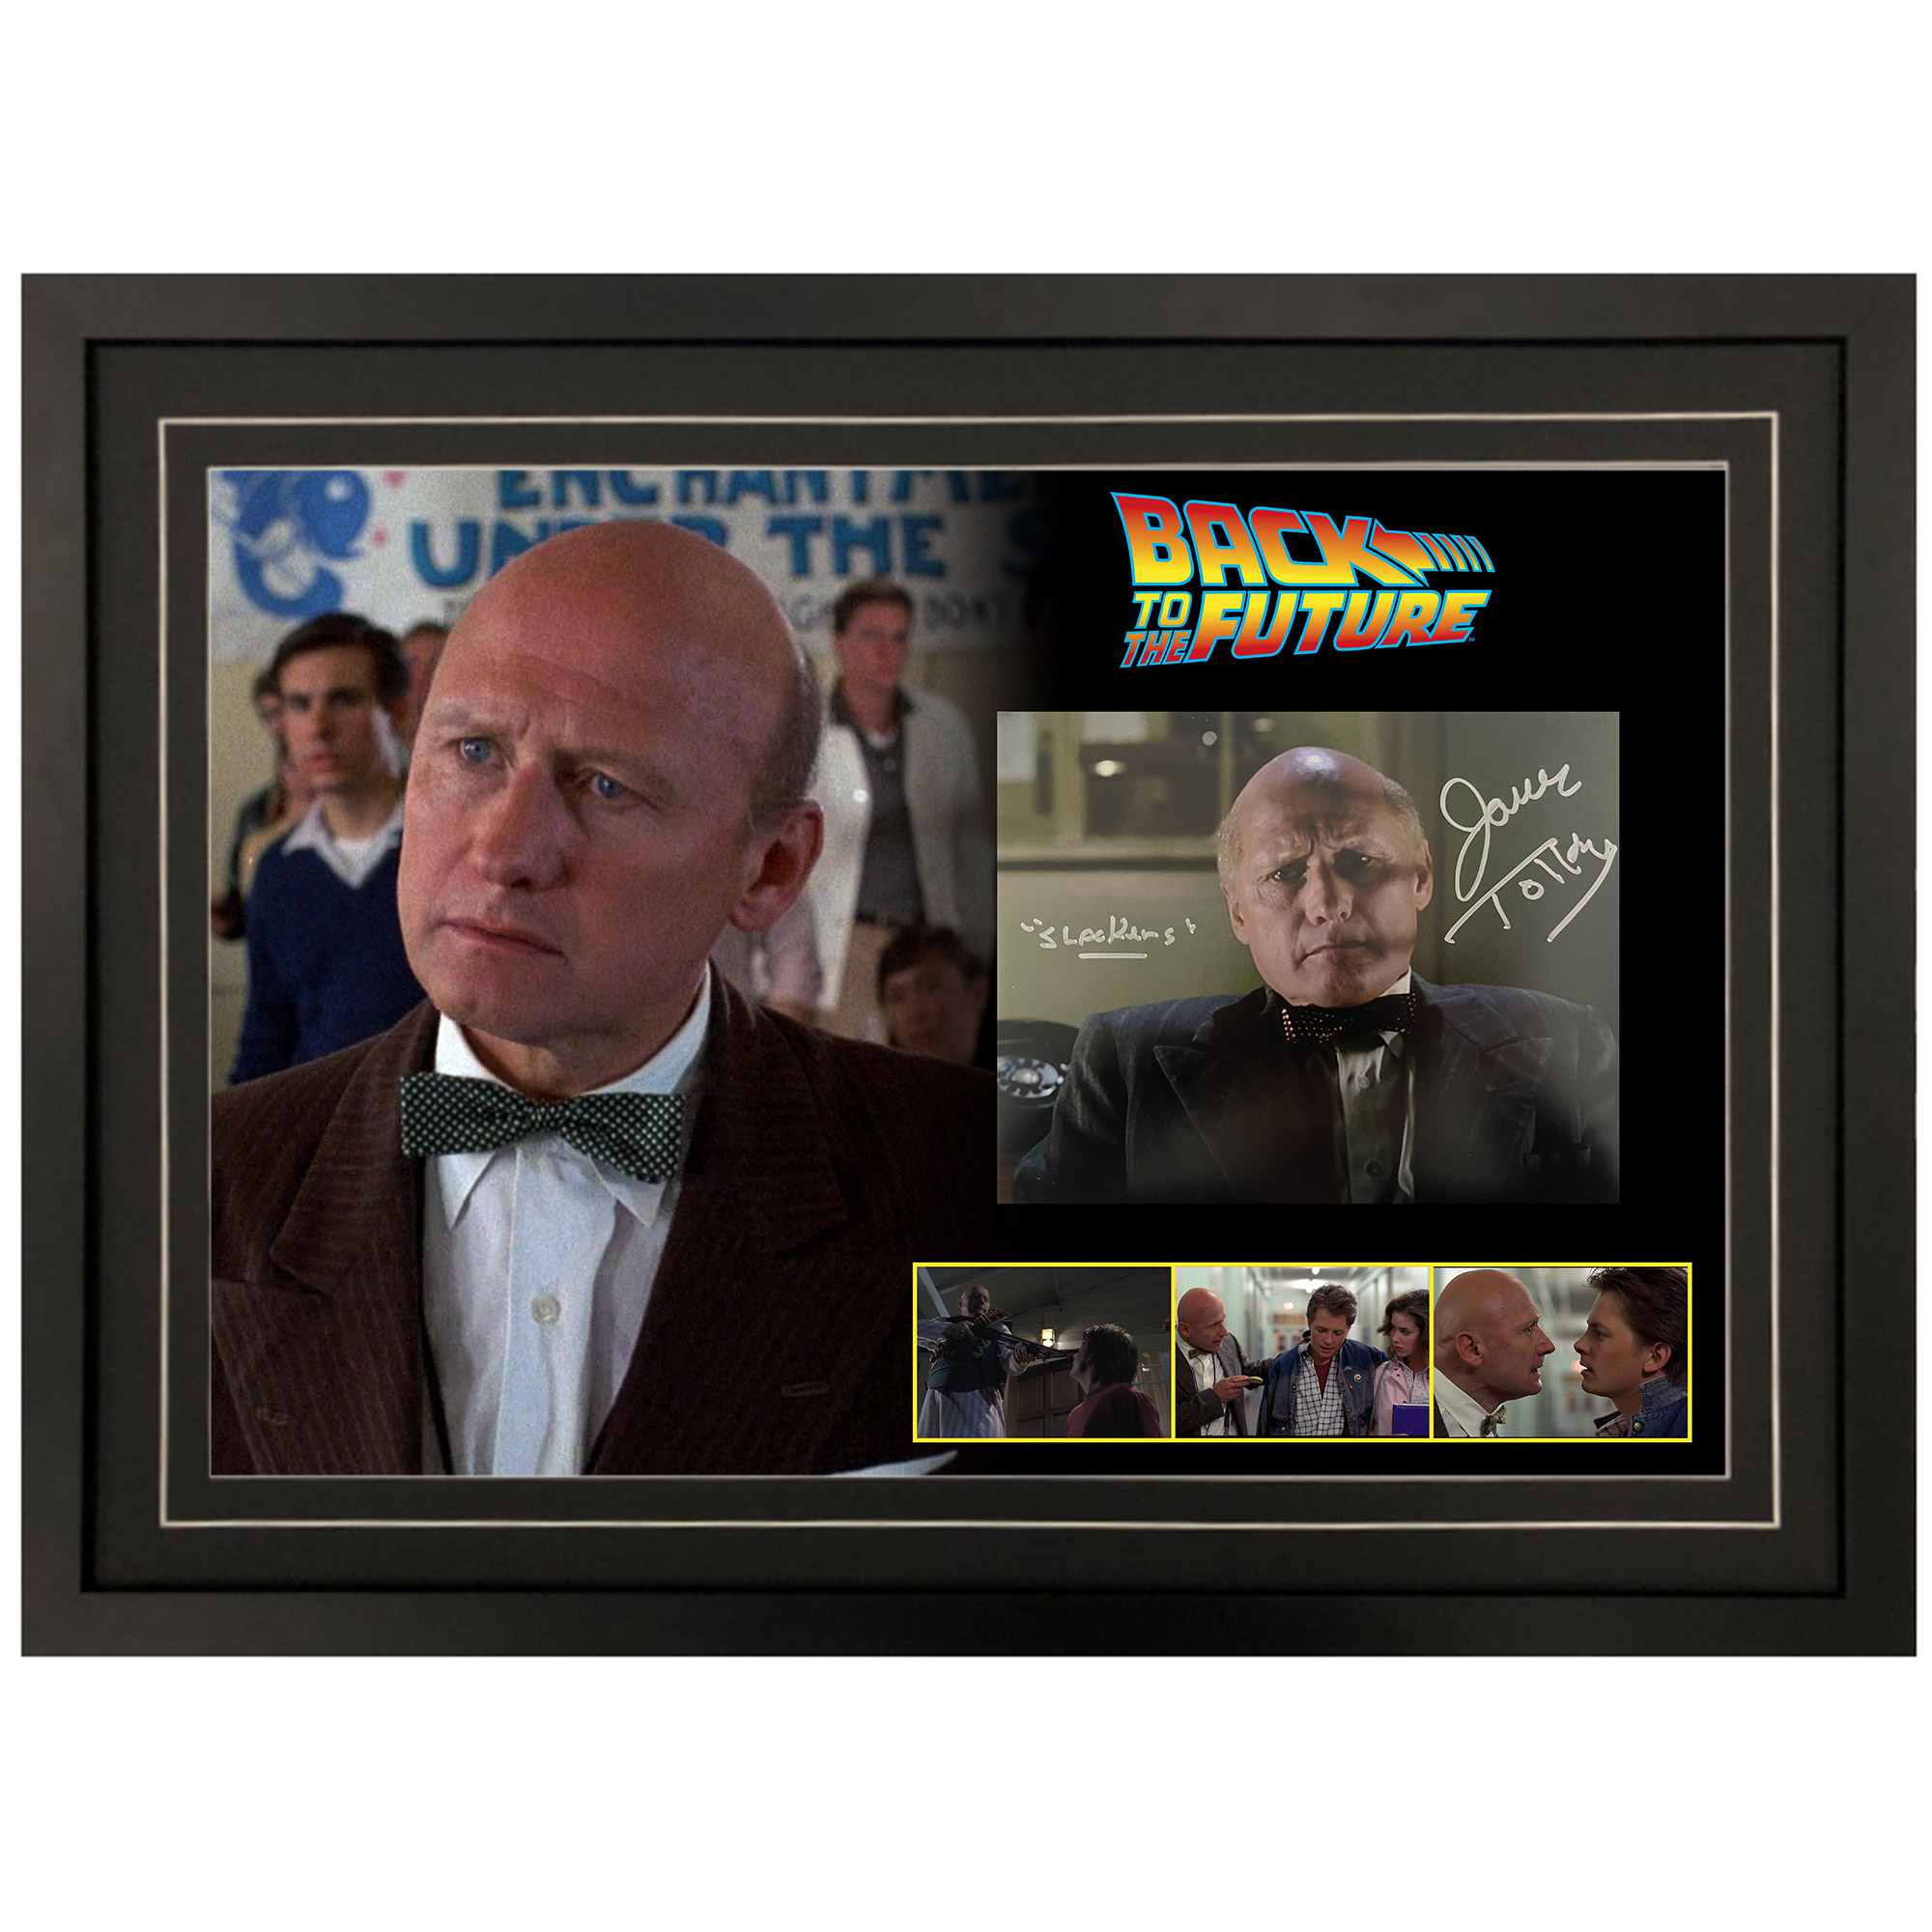 James Tolkan – “Back To The Future” Mr. Strickland S...